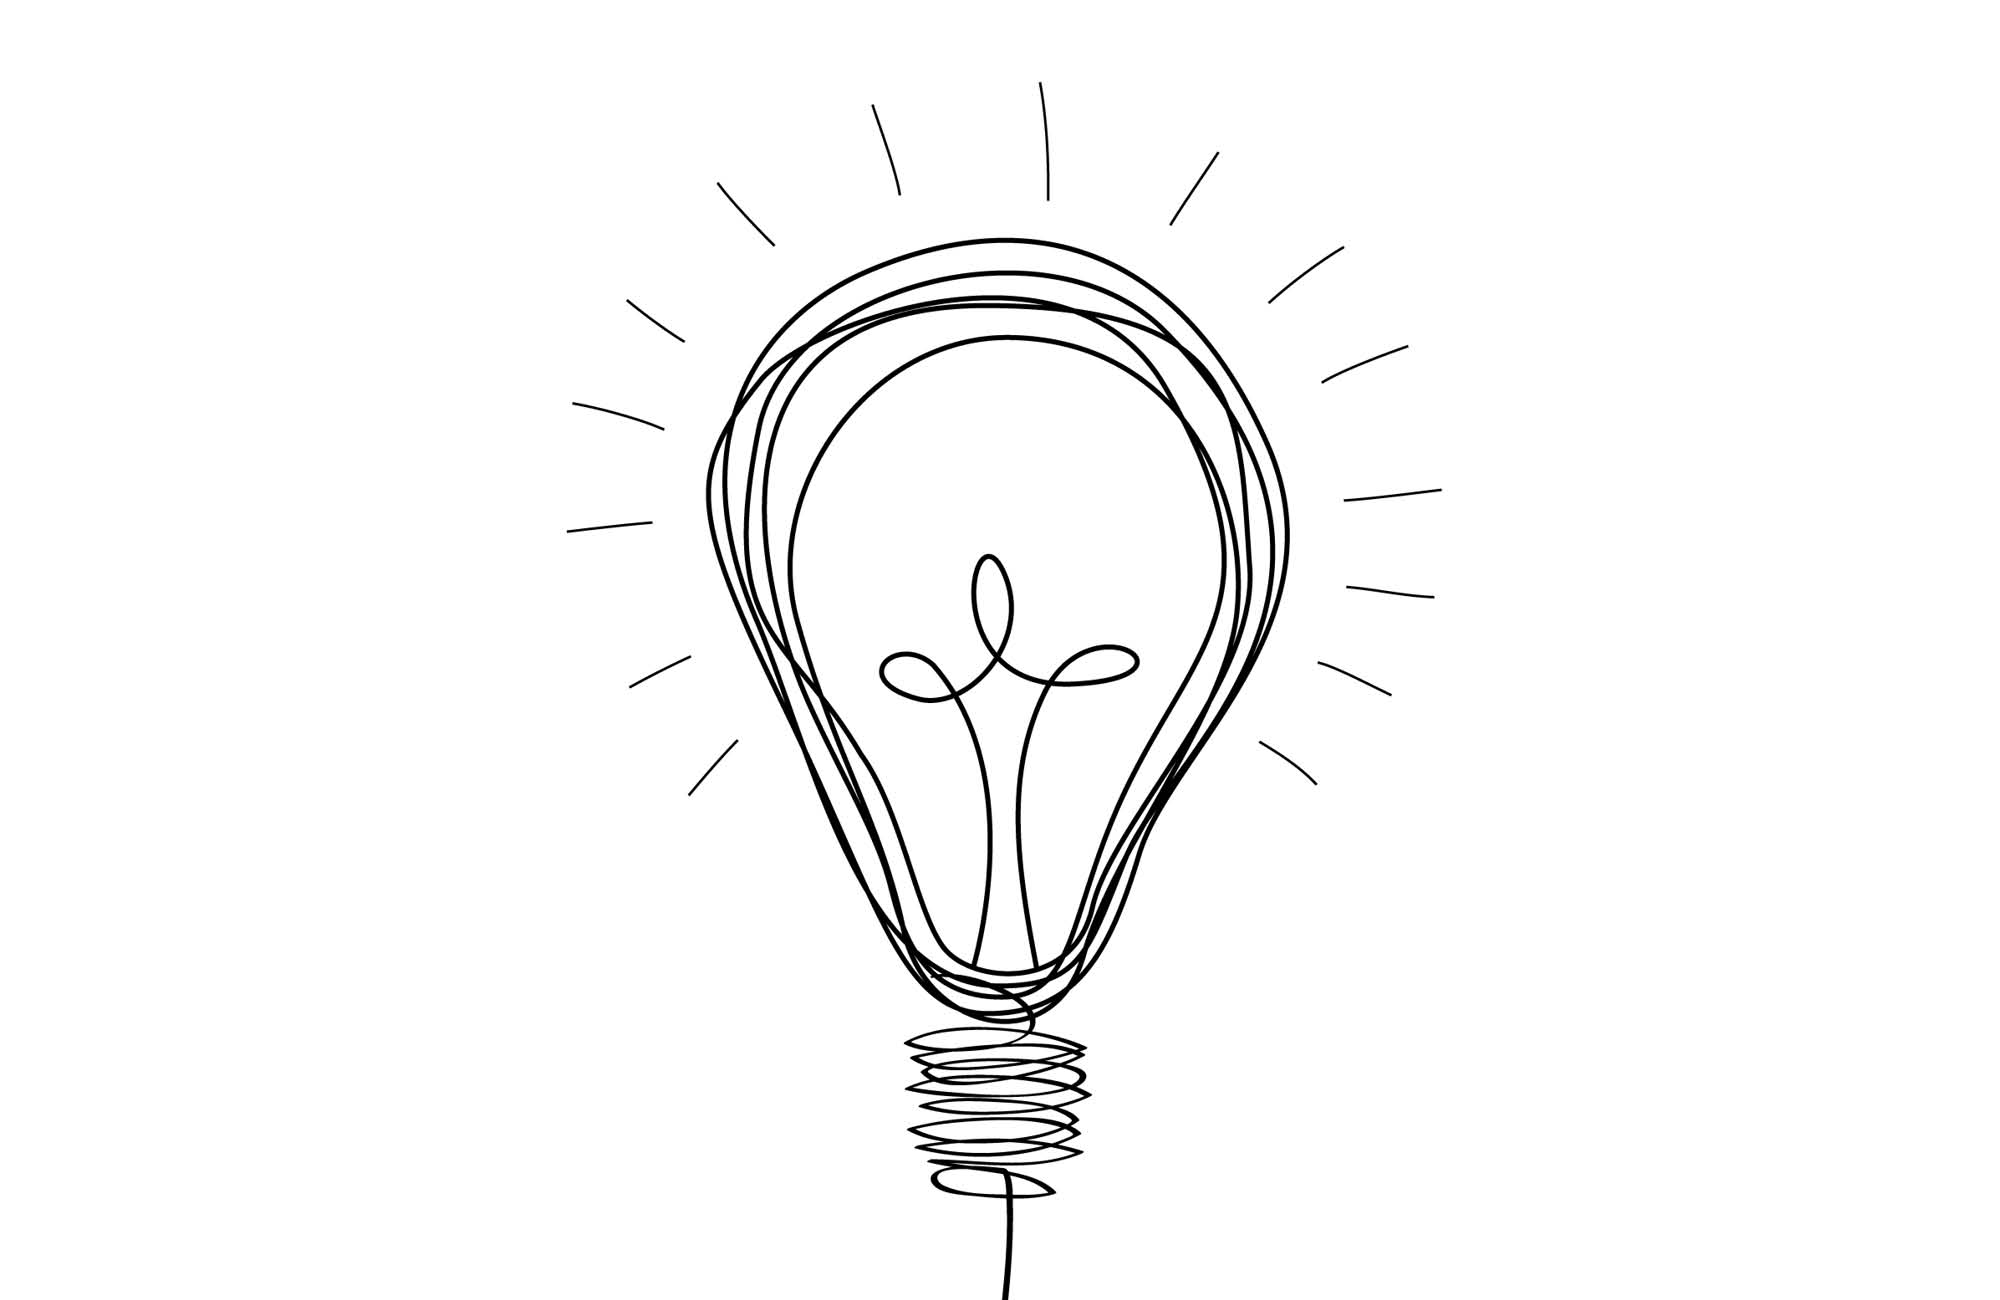 Icon for new ideas within our product development process